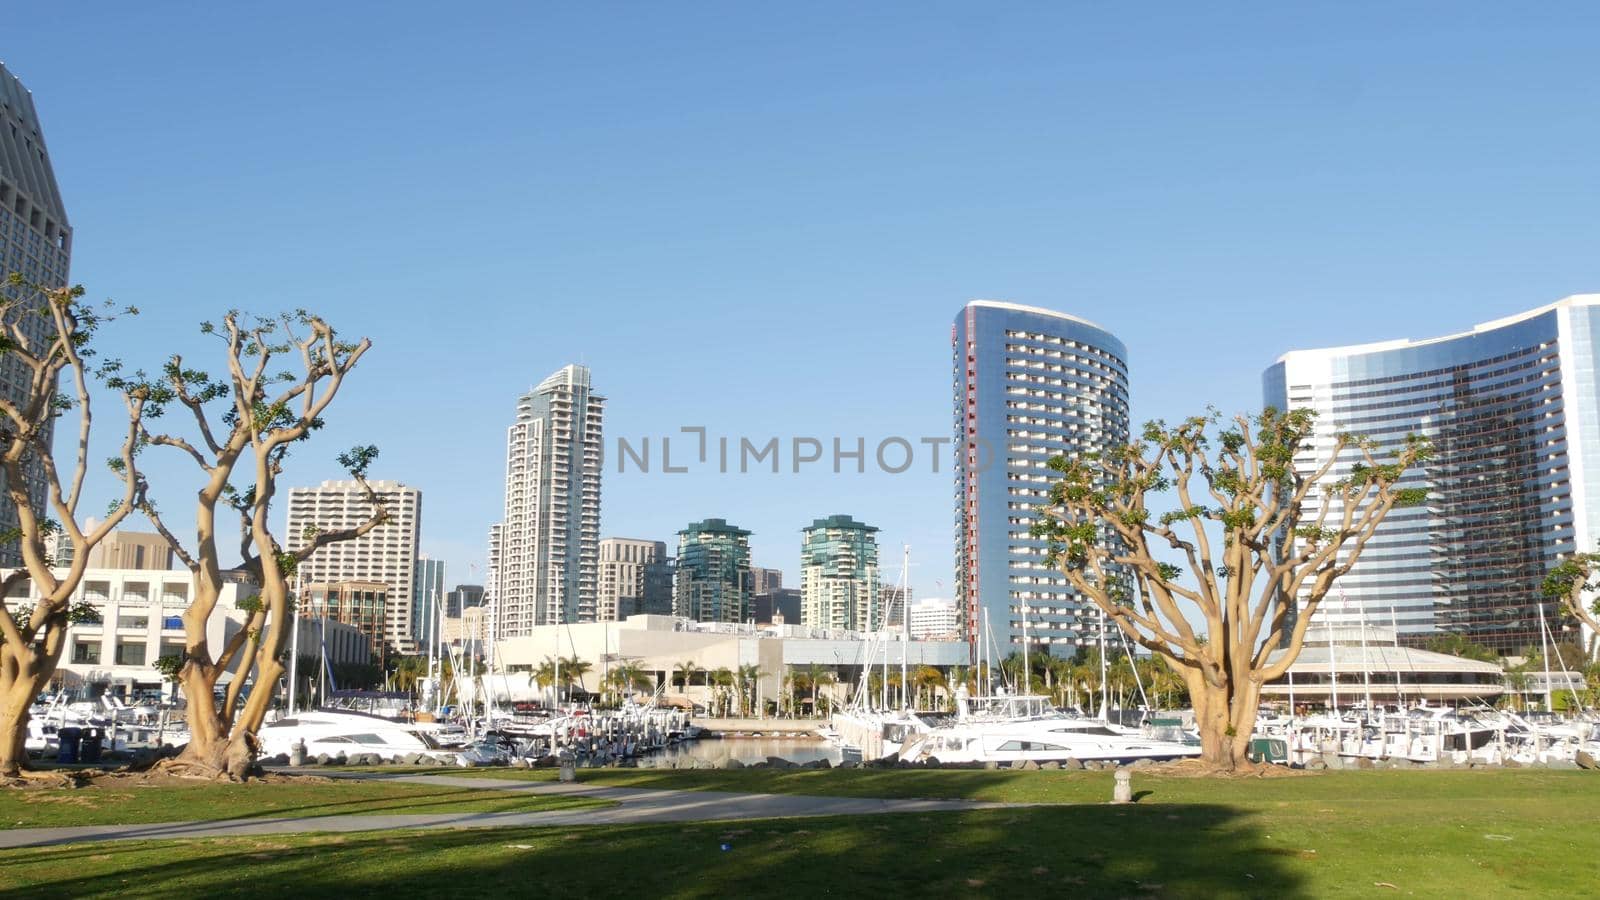 Embarcadero marina park, big coral trees near USS Midway and Convention Center, Seaport Village, San Diego, California USA. Luxury yachts and hotels, metropolis urban skyline and highrise skyscrapers by DogoraSun